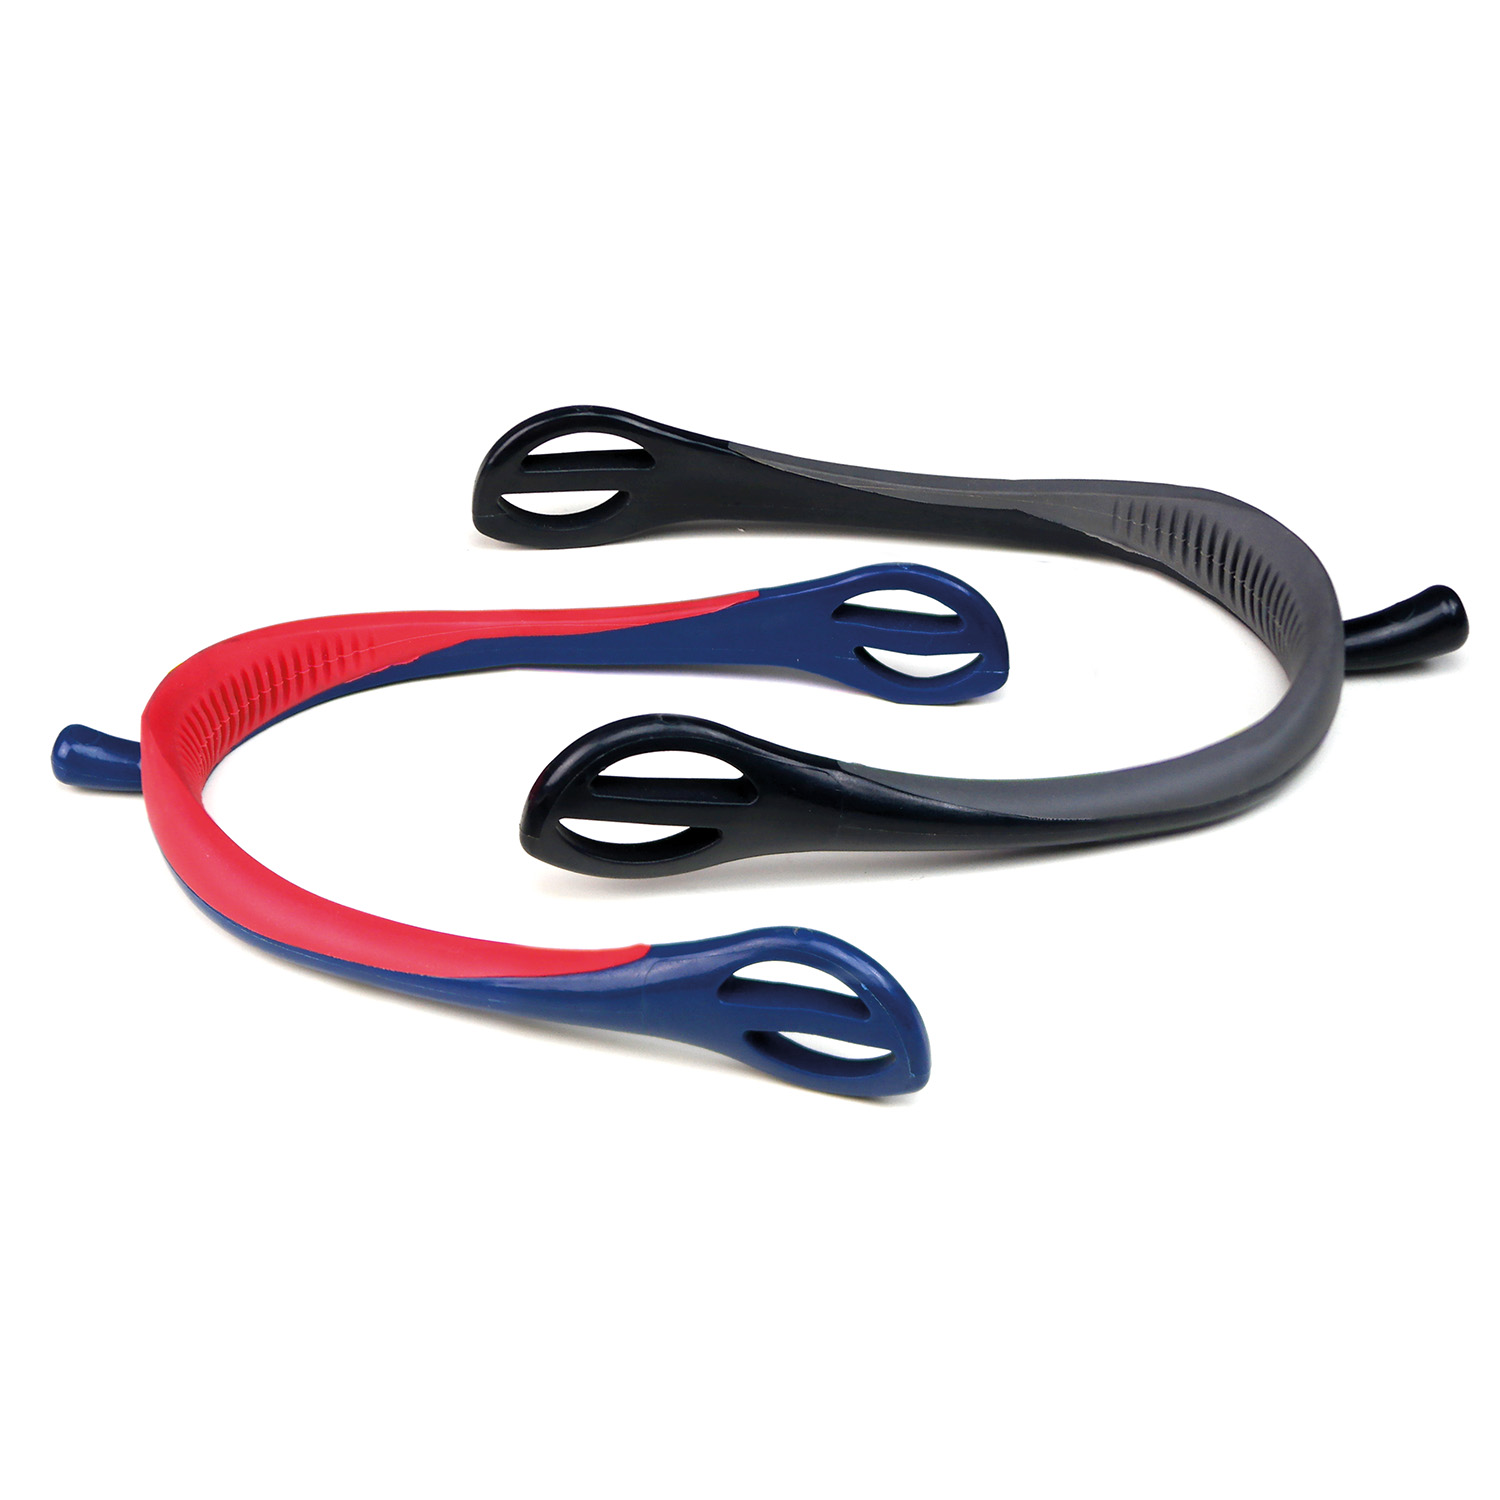 WHITAKER SOFT TOUCH NYLON SPURS RED/NAVY